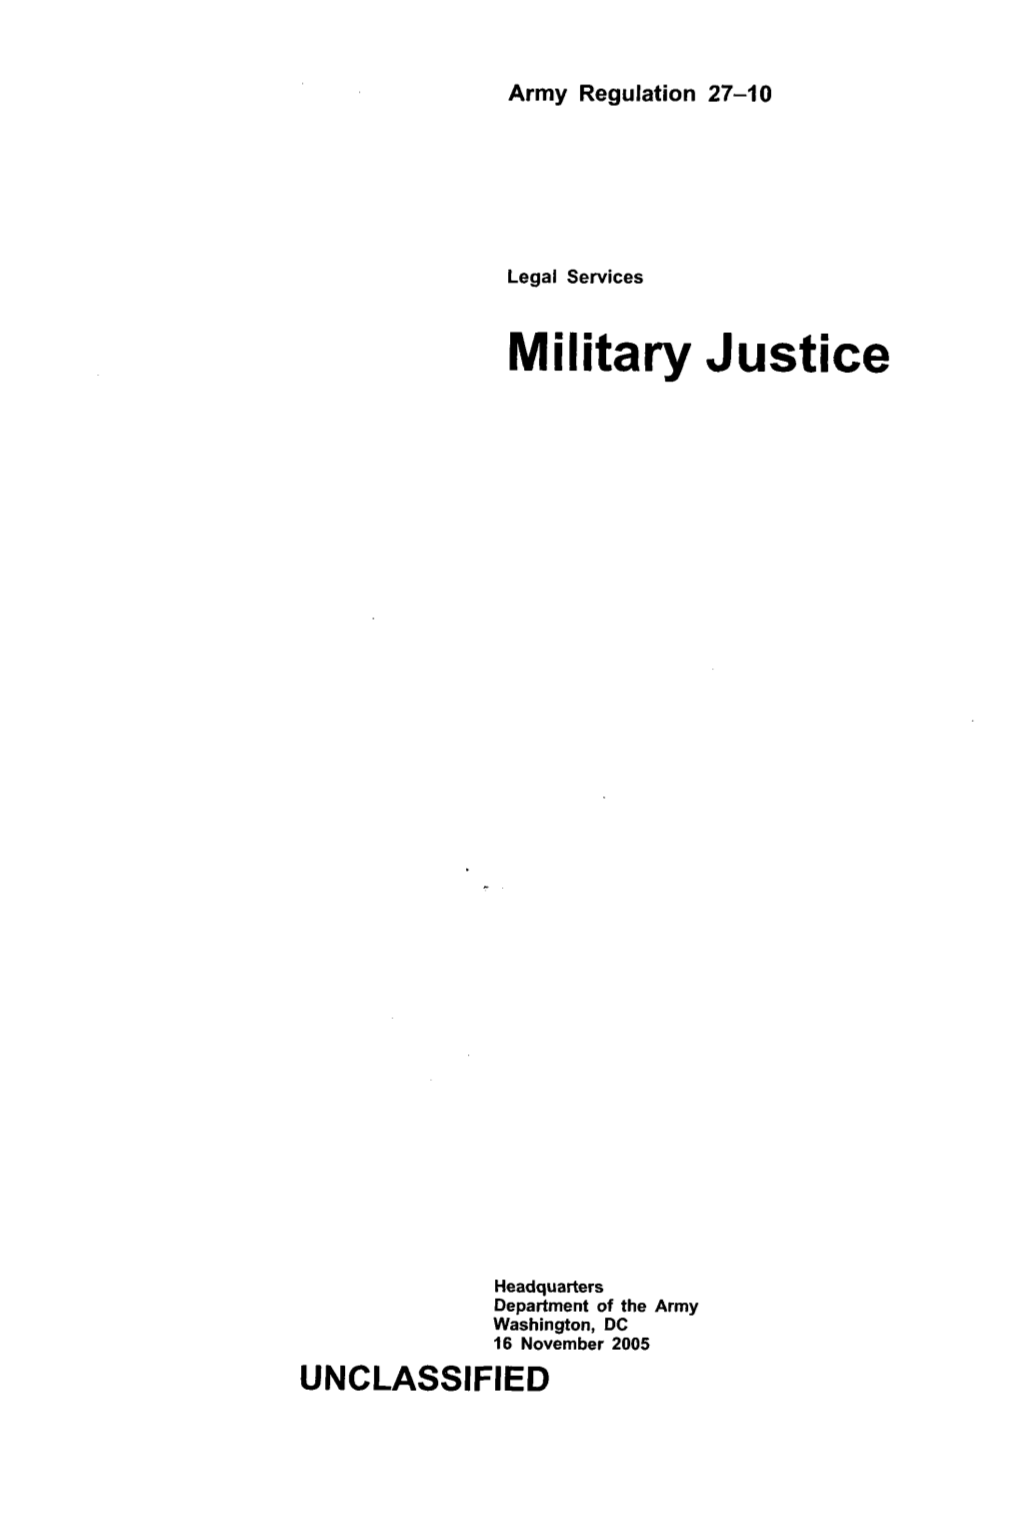 AR 27-10, Legal Services, Military Justice, 16 November 2005